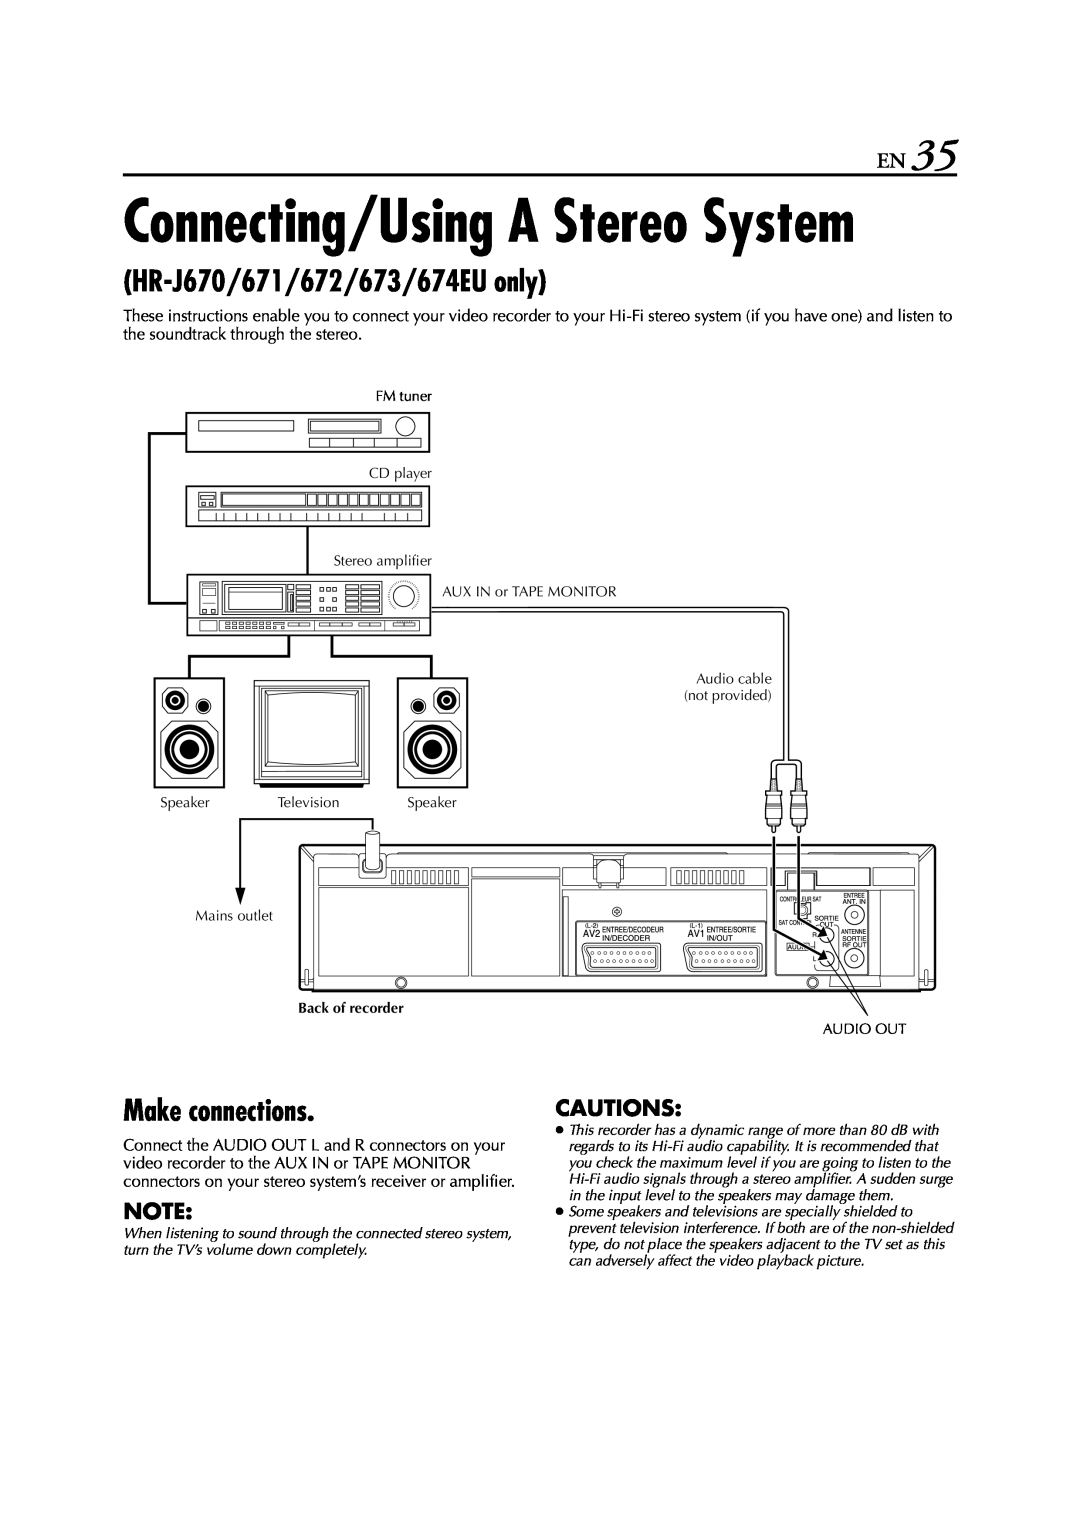 JVC HR-J674EU Connecting/Using A Stereo System, HR-J670/671/672/673/674EU only, Make connections, Cautions, Speaker 